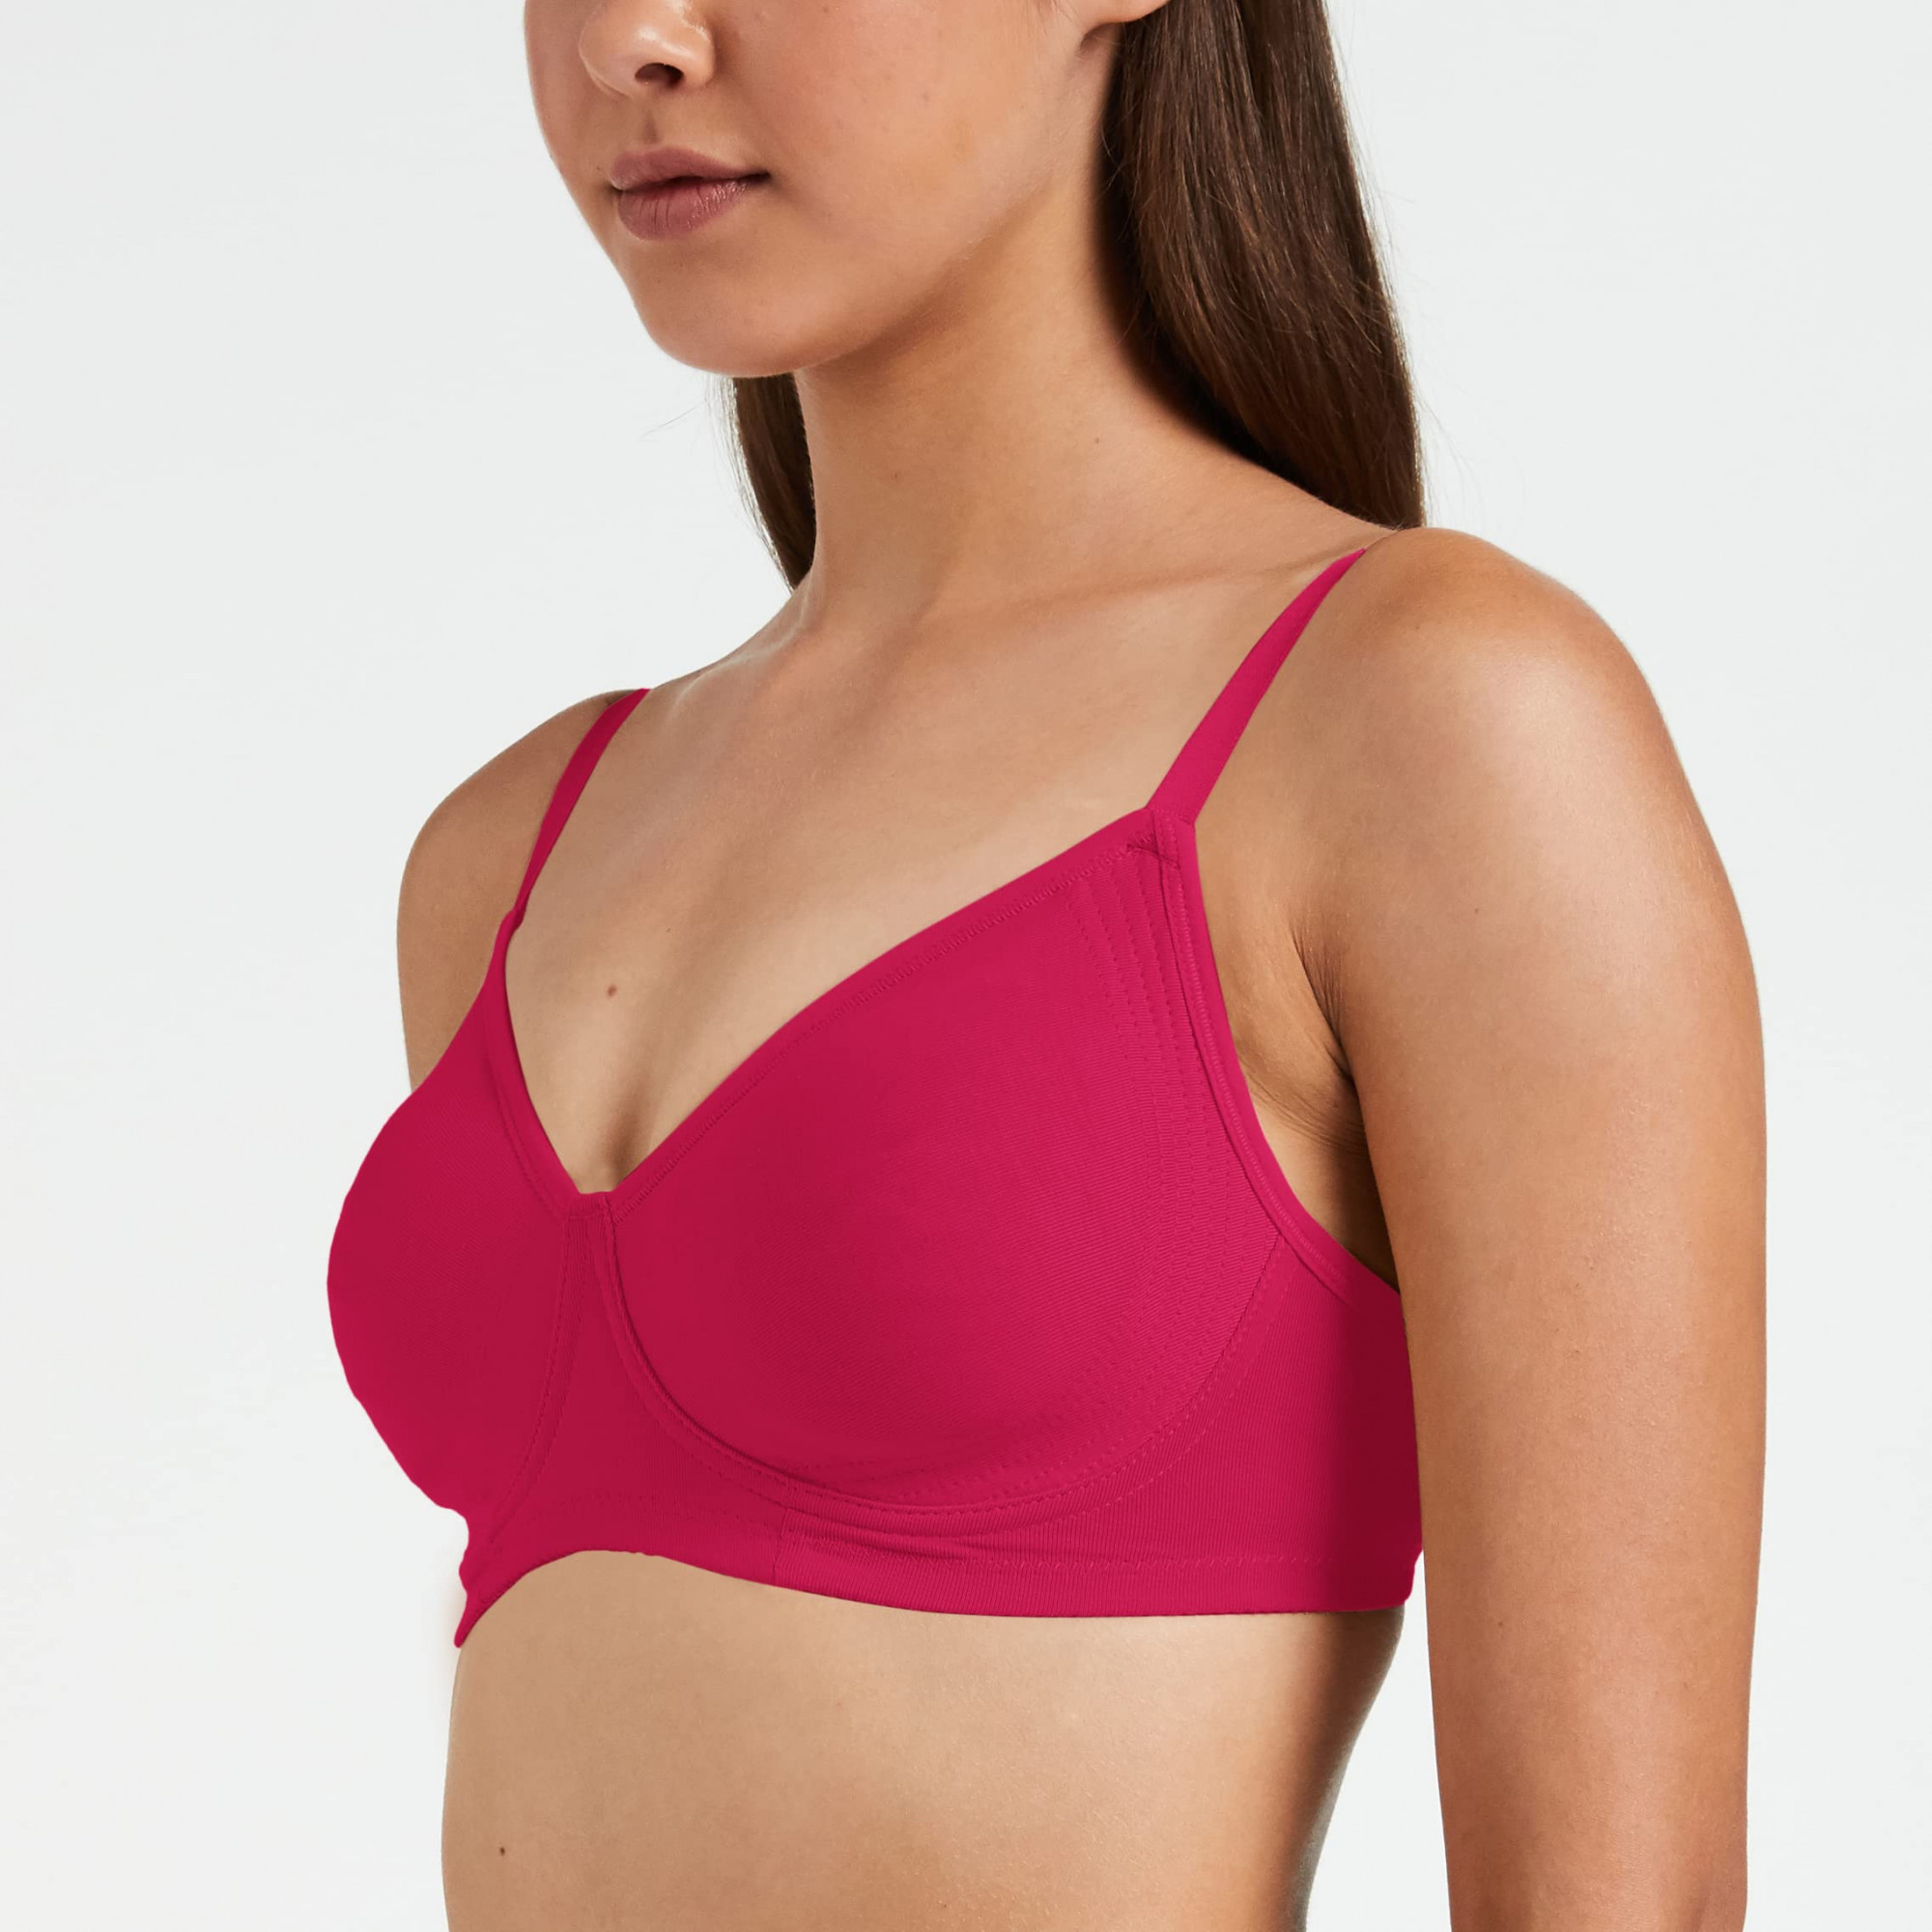 https://www.zebrs.com/uploads/zebrs/products/enamor-a042-side-support-shaper-stretch-cotton-everyday-bra---non-padded-wire-free-amp-high-coveragesize-36z-73138297107611_l.jpg